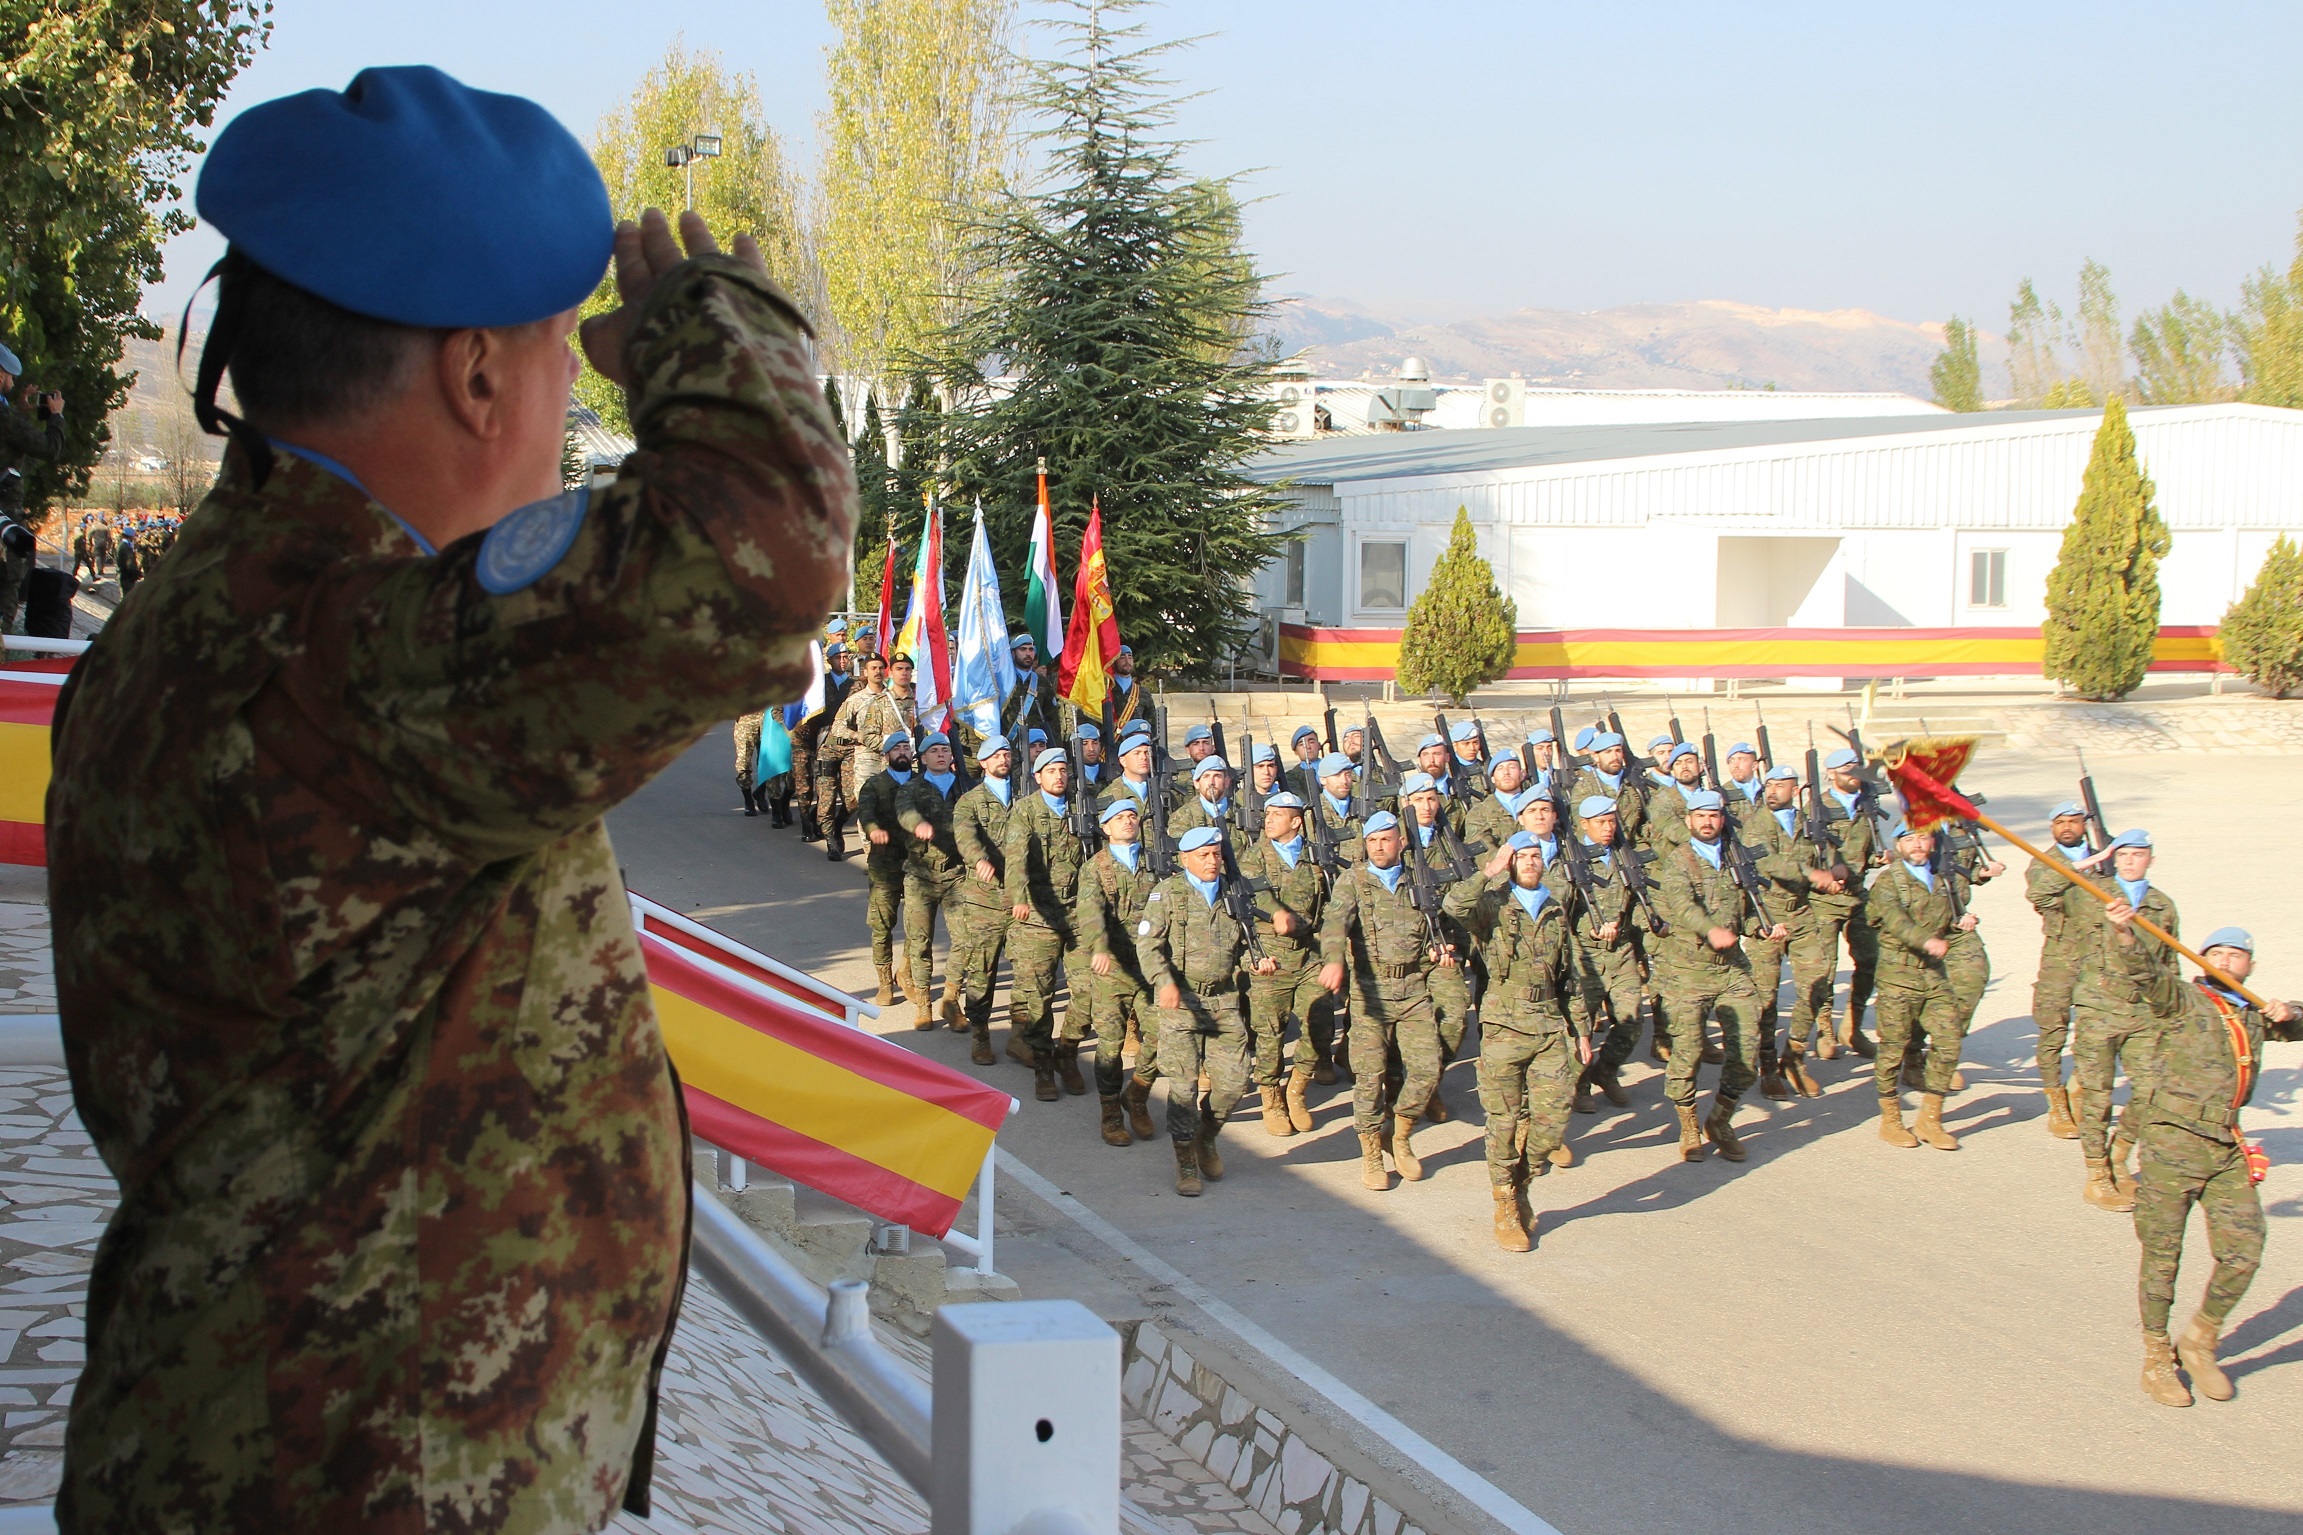 The Legion returns to the Country of Cedars on the eve of its centenary from its foundation